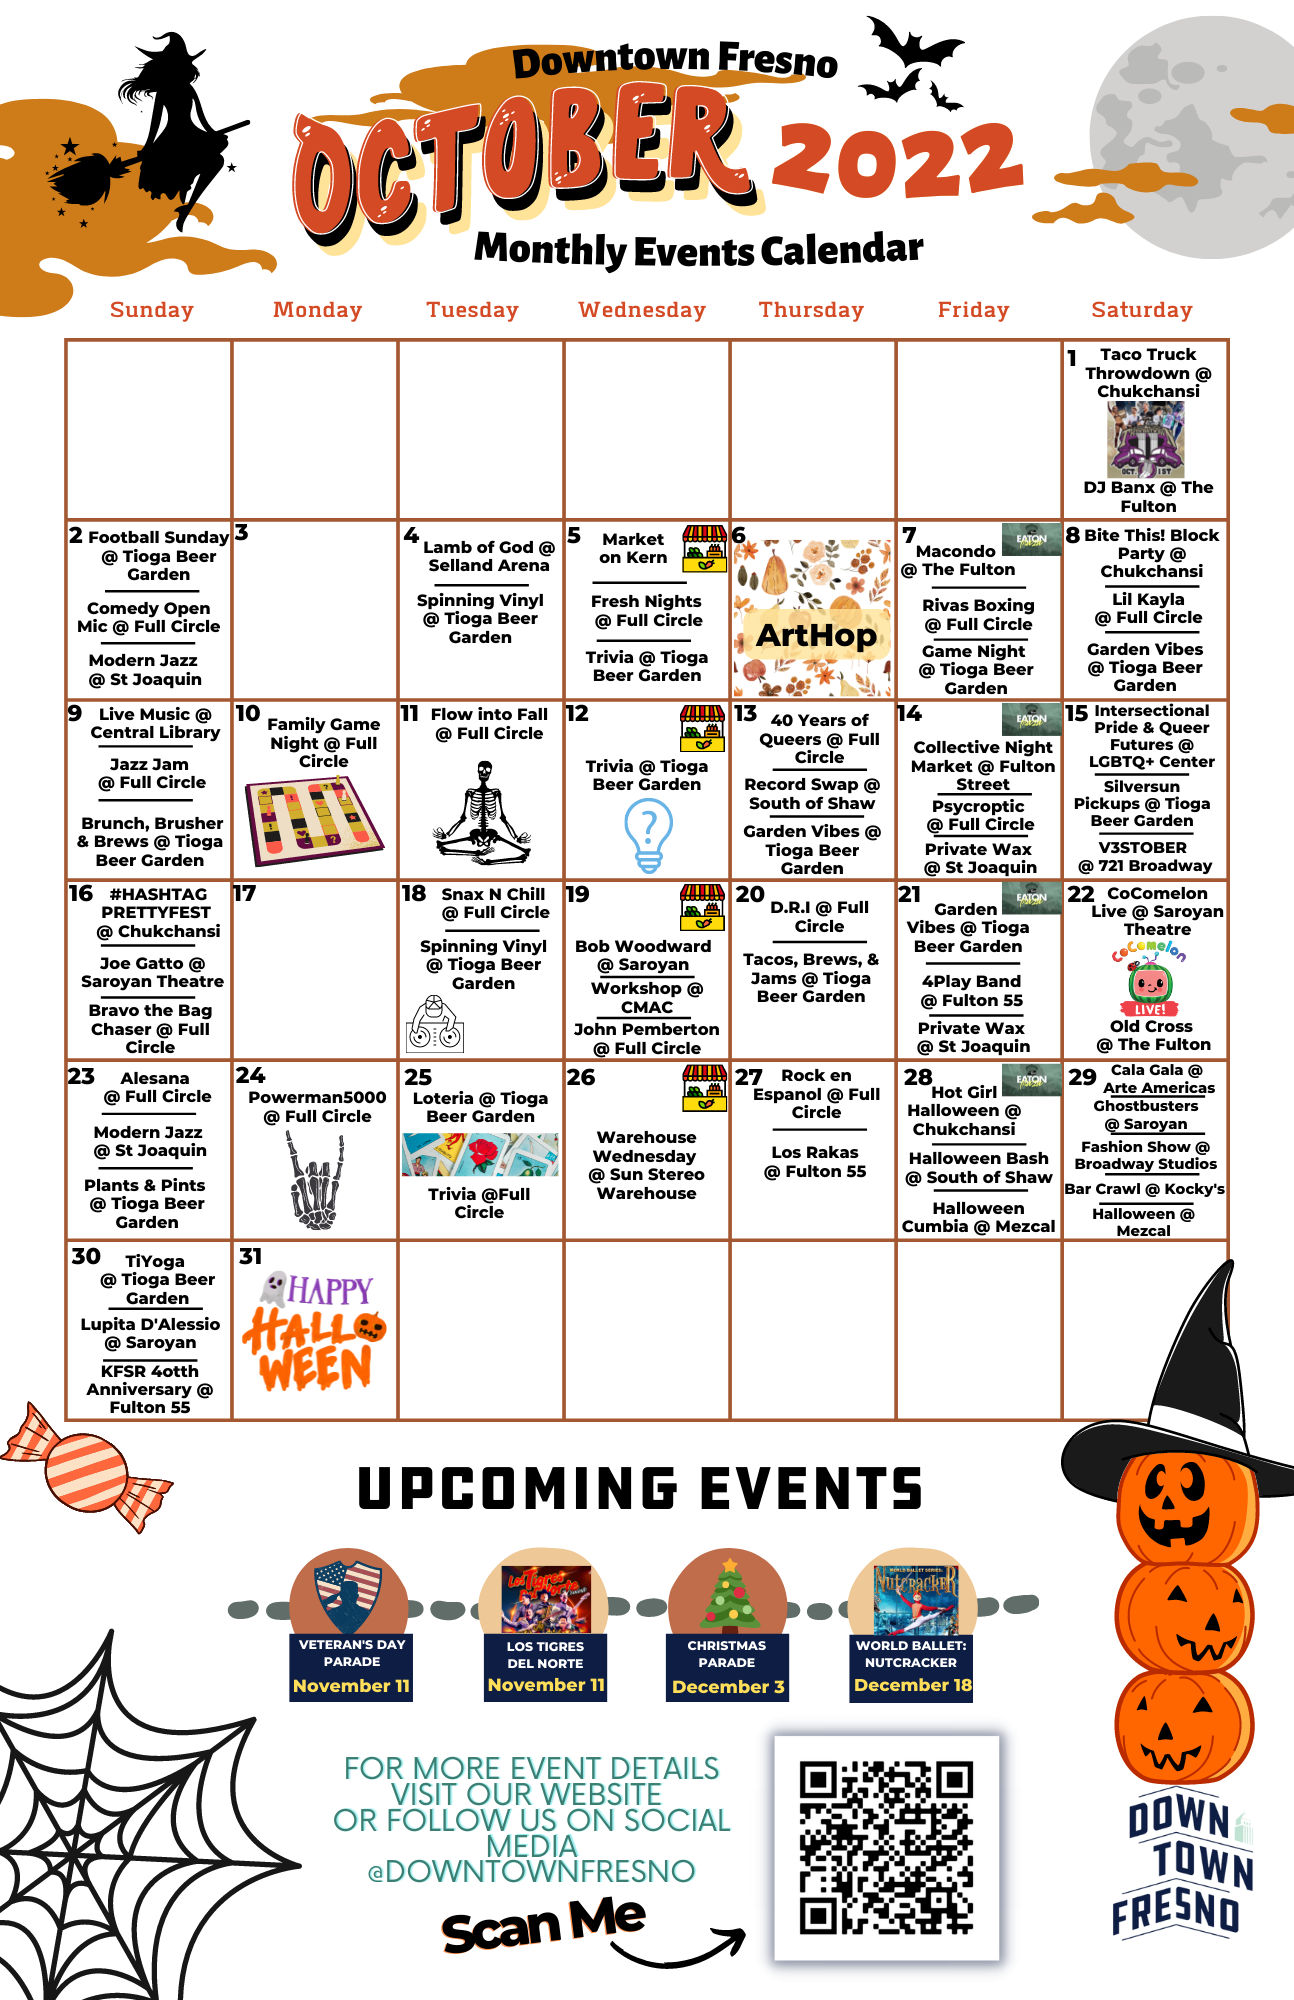 Download the October Events Calendar Here!